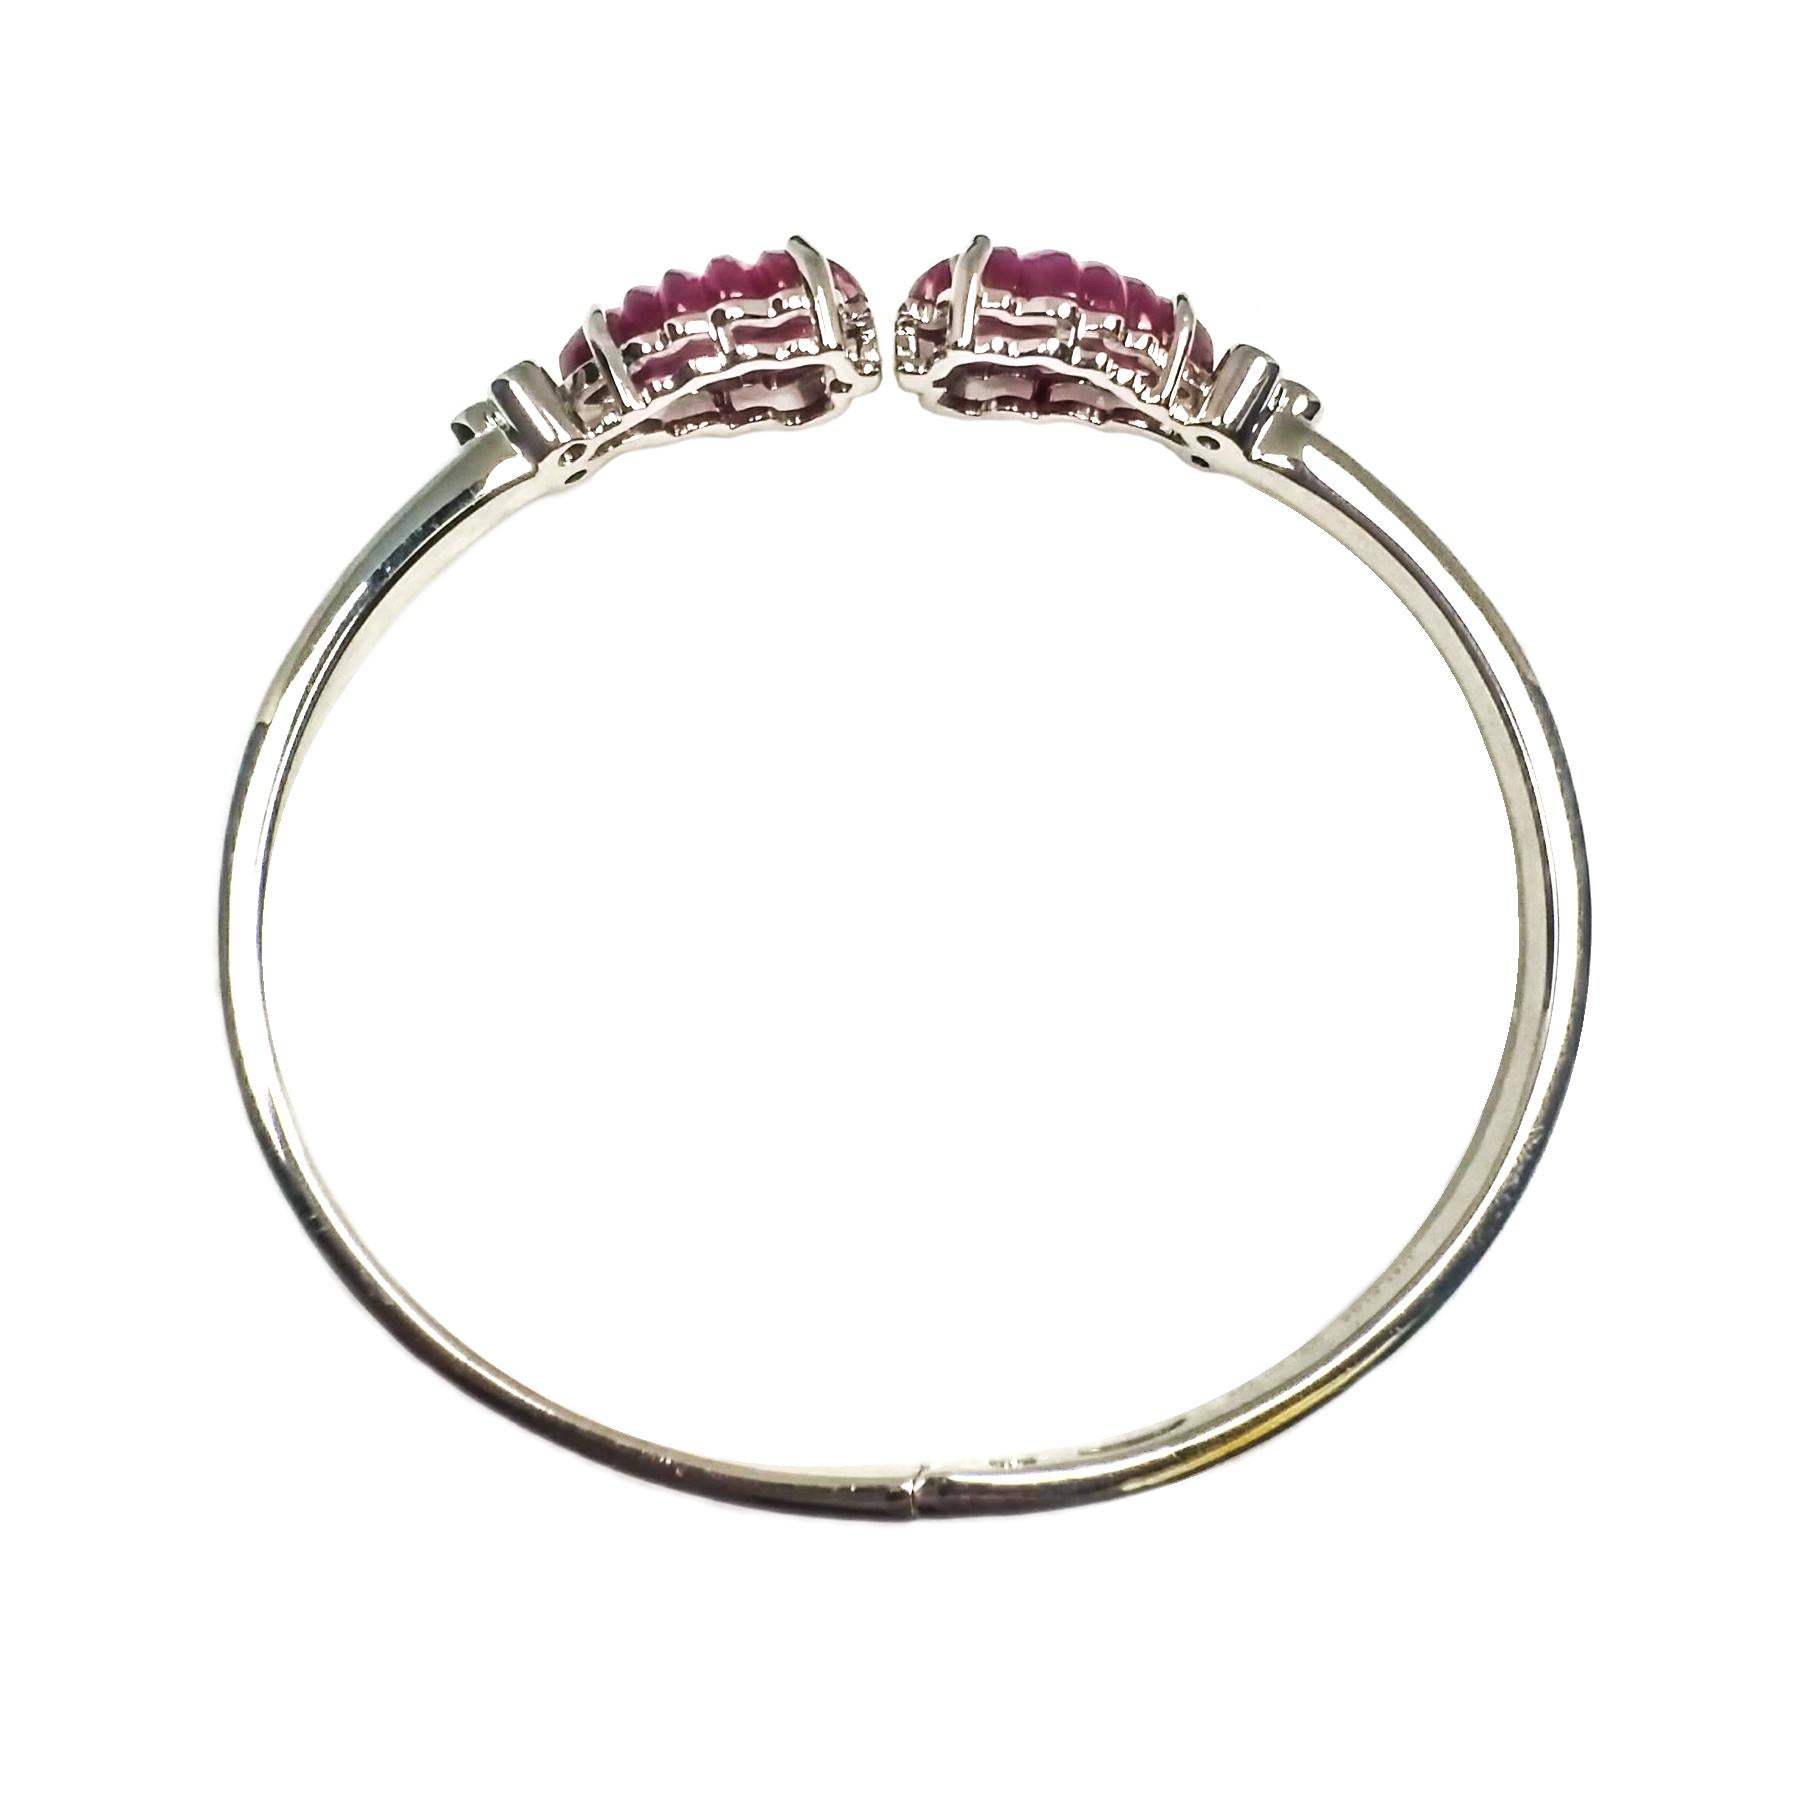 Carved ruby and diamond bangle. Lively red, two matching leaf carved rubies, set in open basket profile with four prongs, accented with round brilliant cut diamonds. Beautiful high polished bangle set in 14 karat white gold, with hinged clasp.